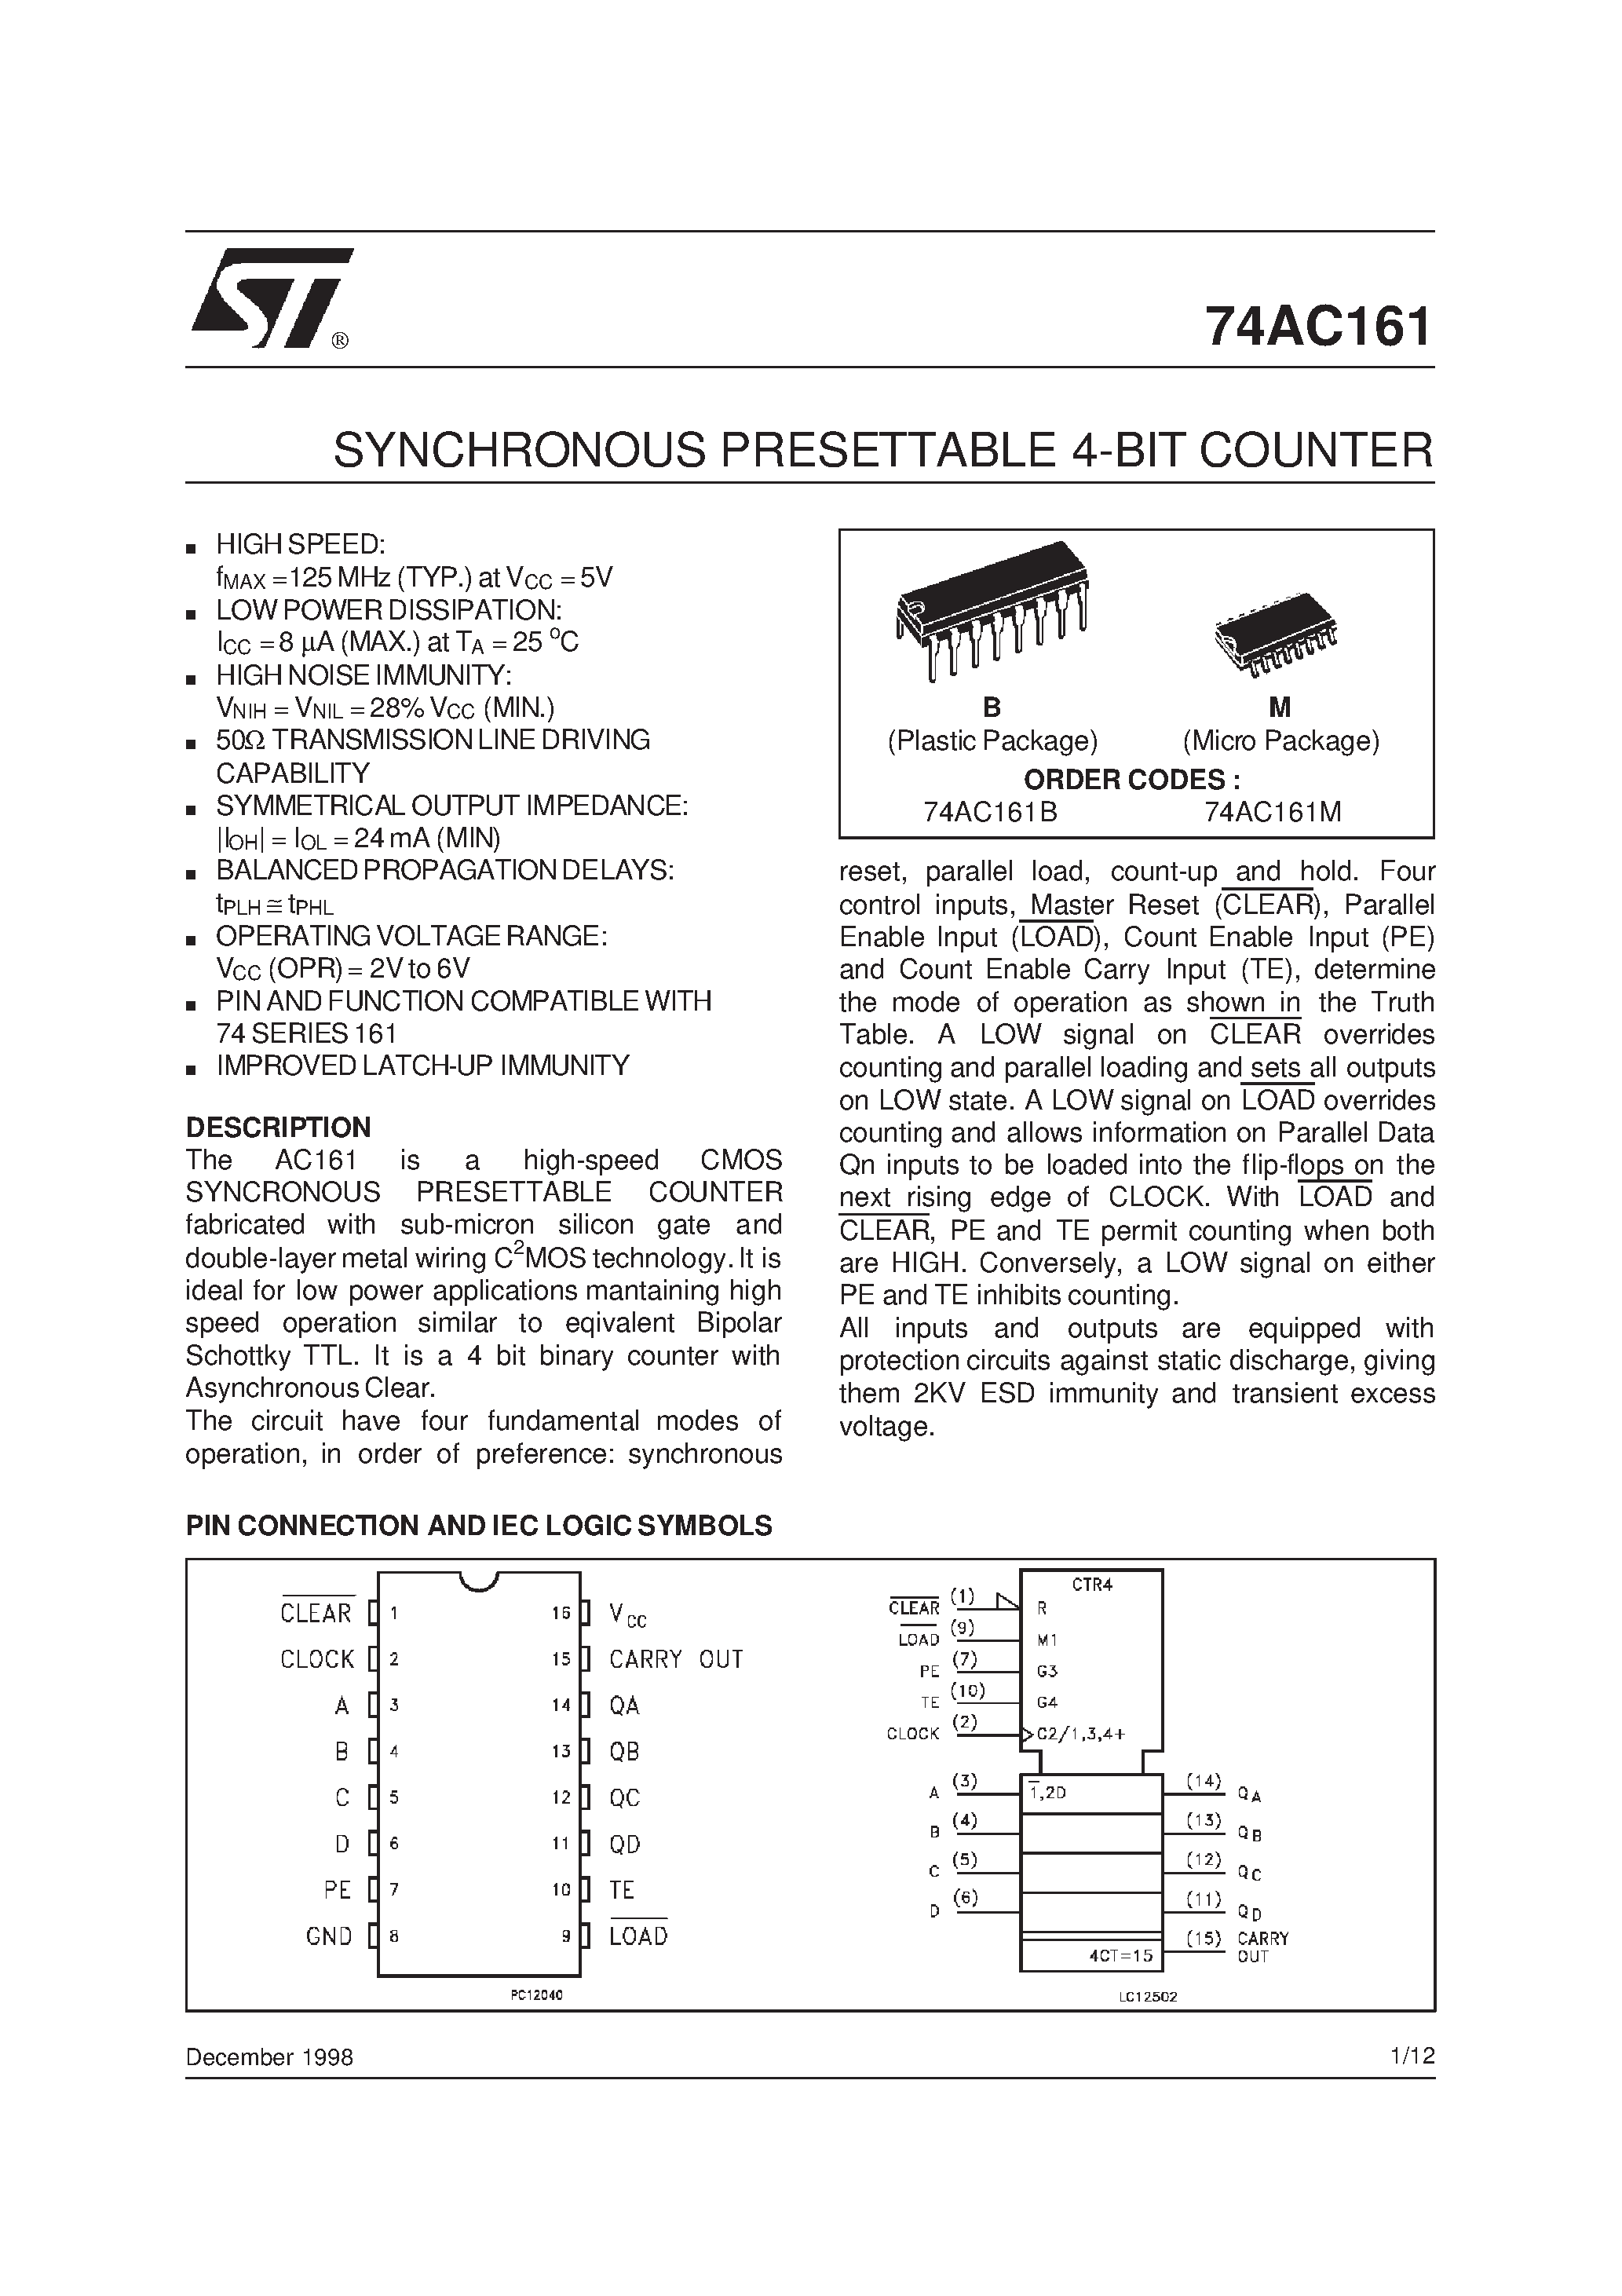 Datasheet 74AC161M - SYNCHRONOUS PRESETTABLE 4-BIT COUNTER page 1